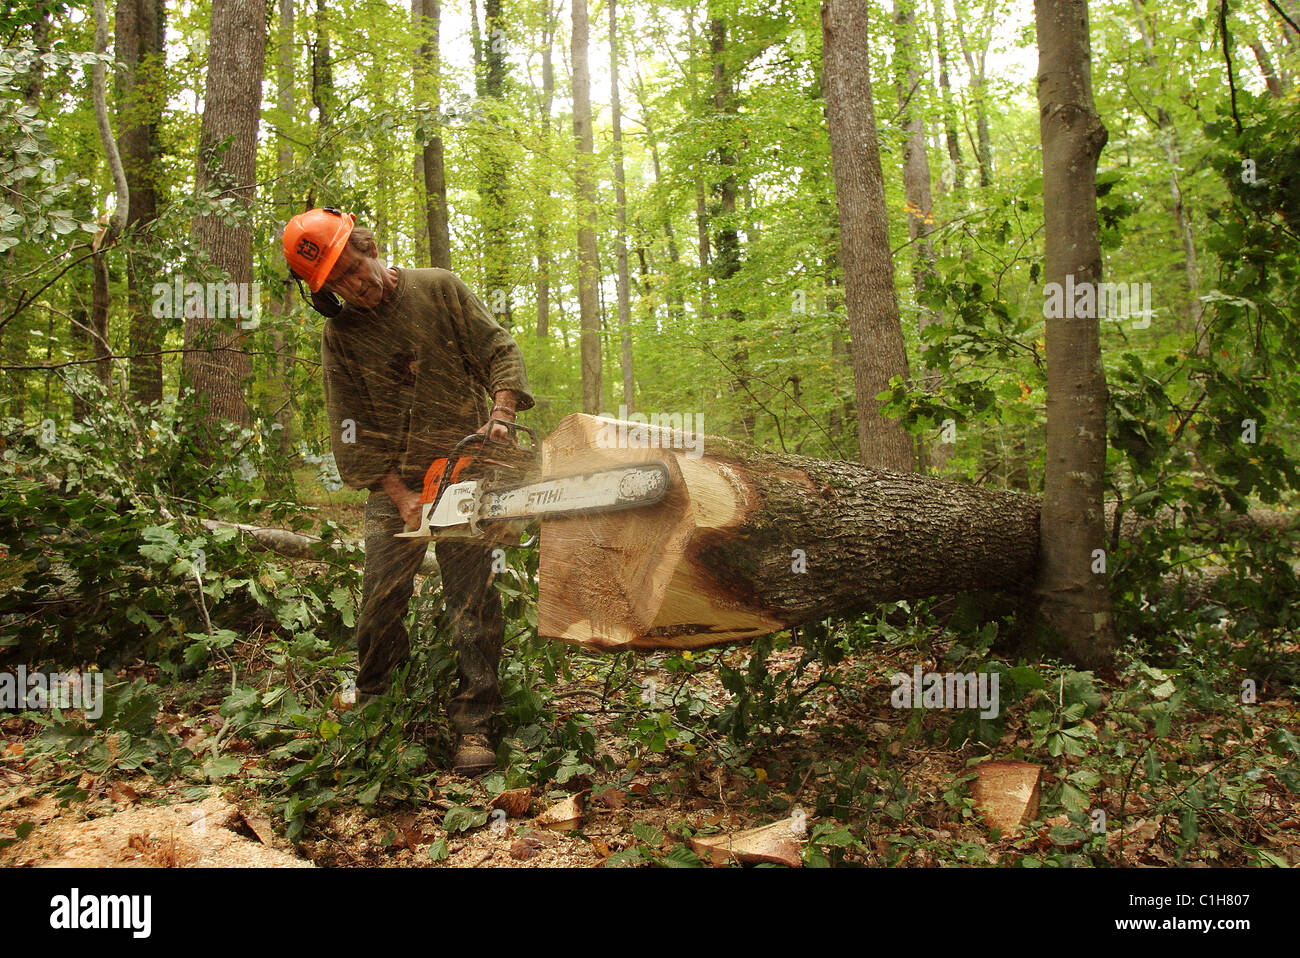 France, Allier, woodcutter in Tronçais forest Stock Photo